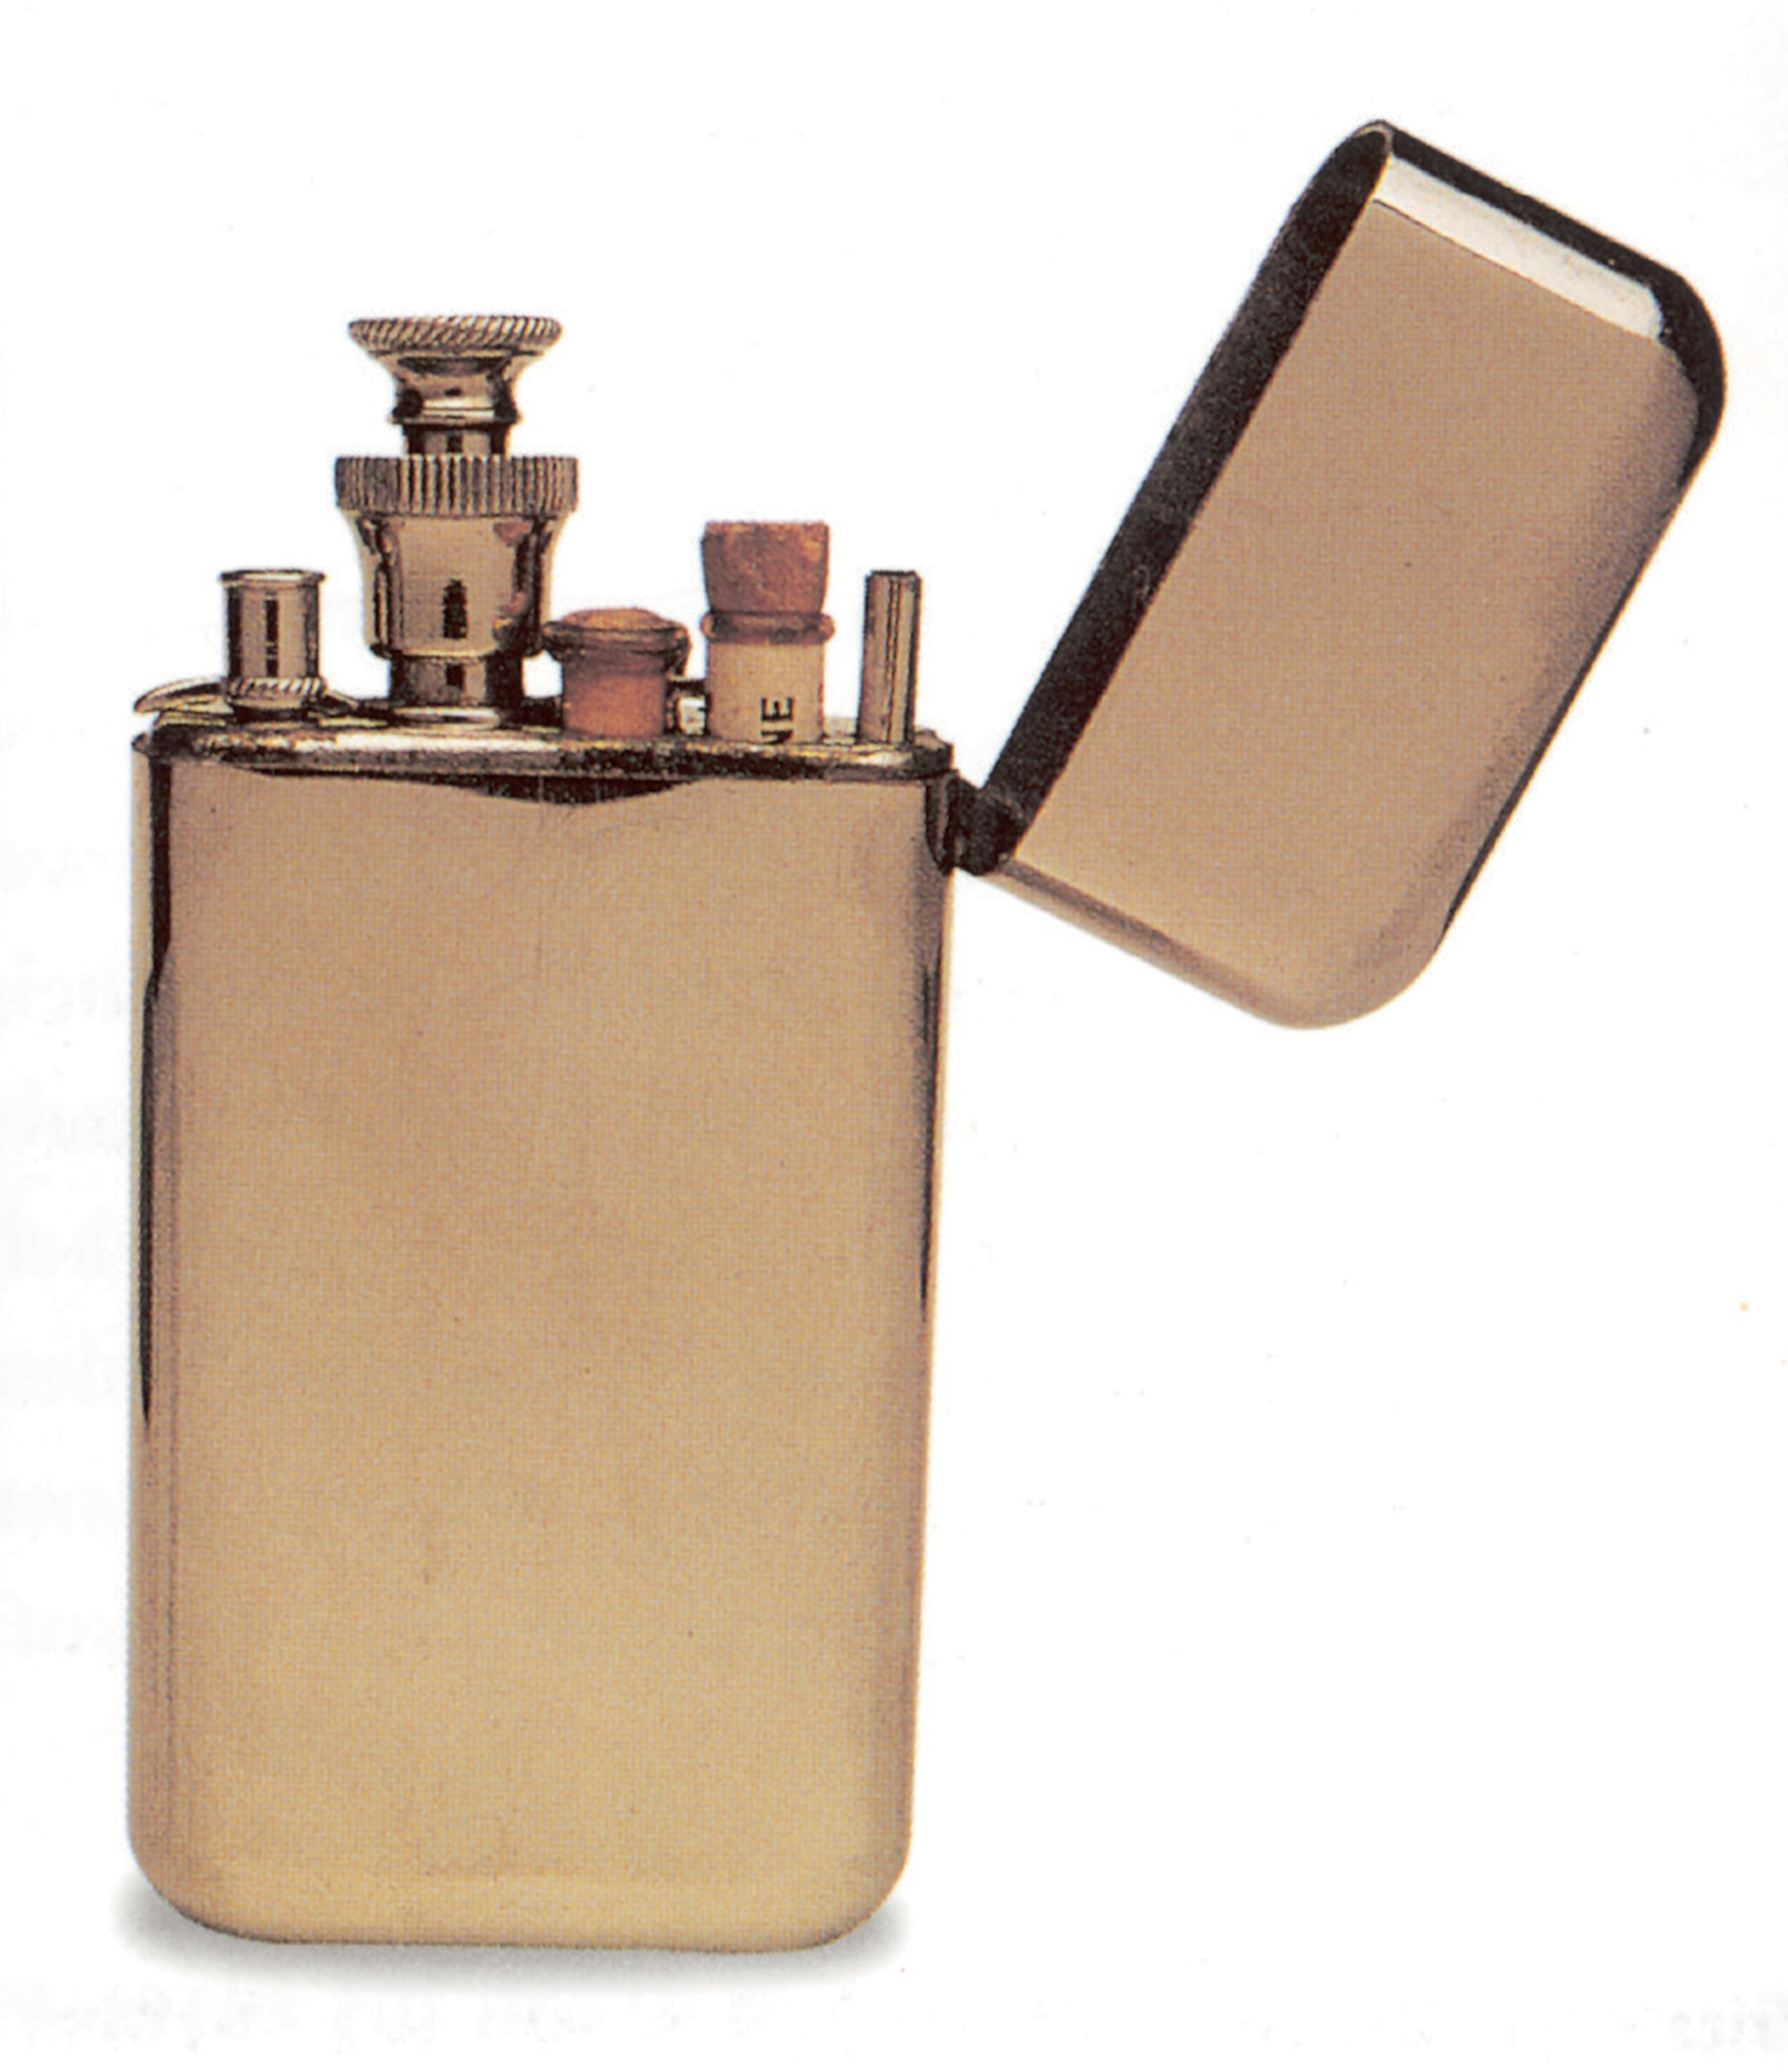 Early 20th-century morphine kit disguised as a cigarette lighter. Courtesy Colin Schebek.